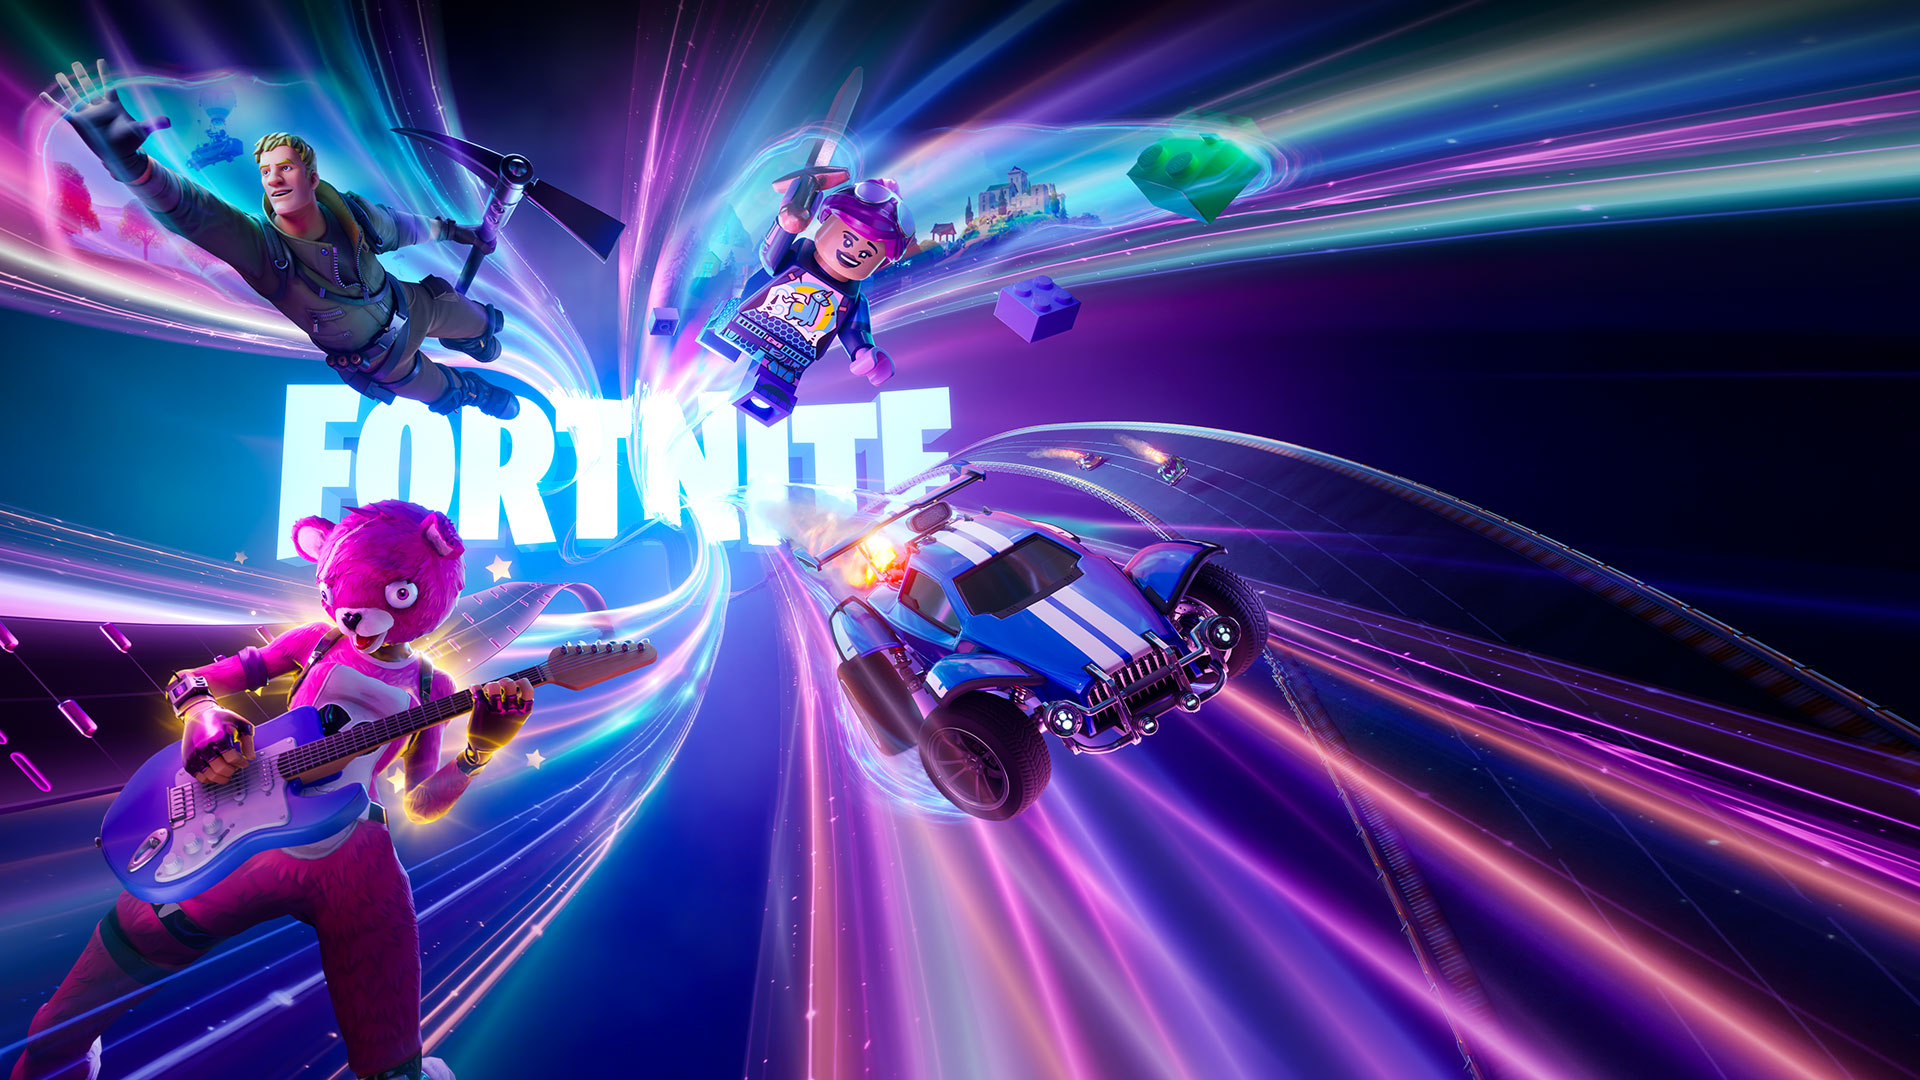 Fortnite Logo, a Fortnite character with a pickaxe, a pink bear with a guitar, a Lego figure and a rocket car fly forward with neon swirls around them.